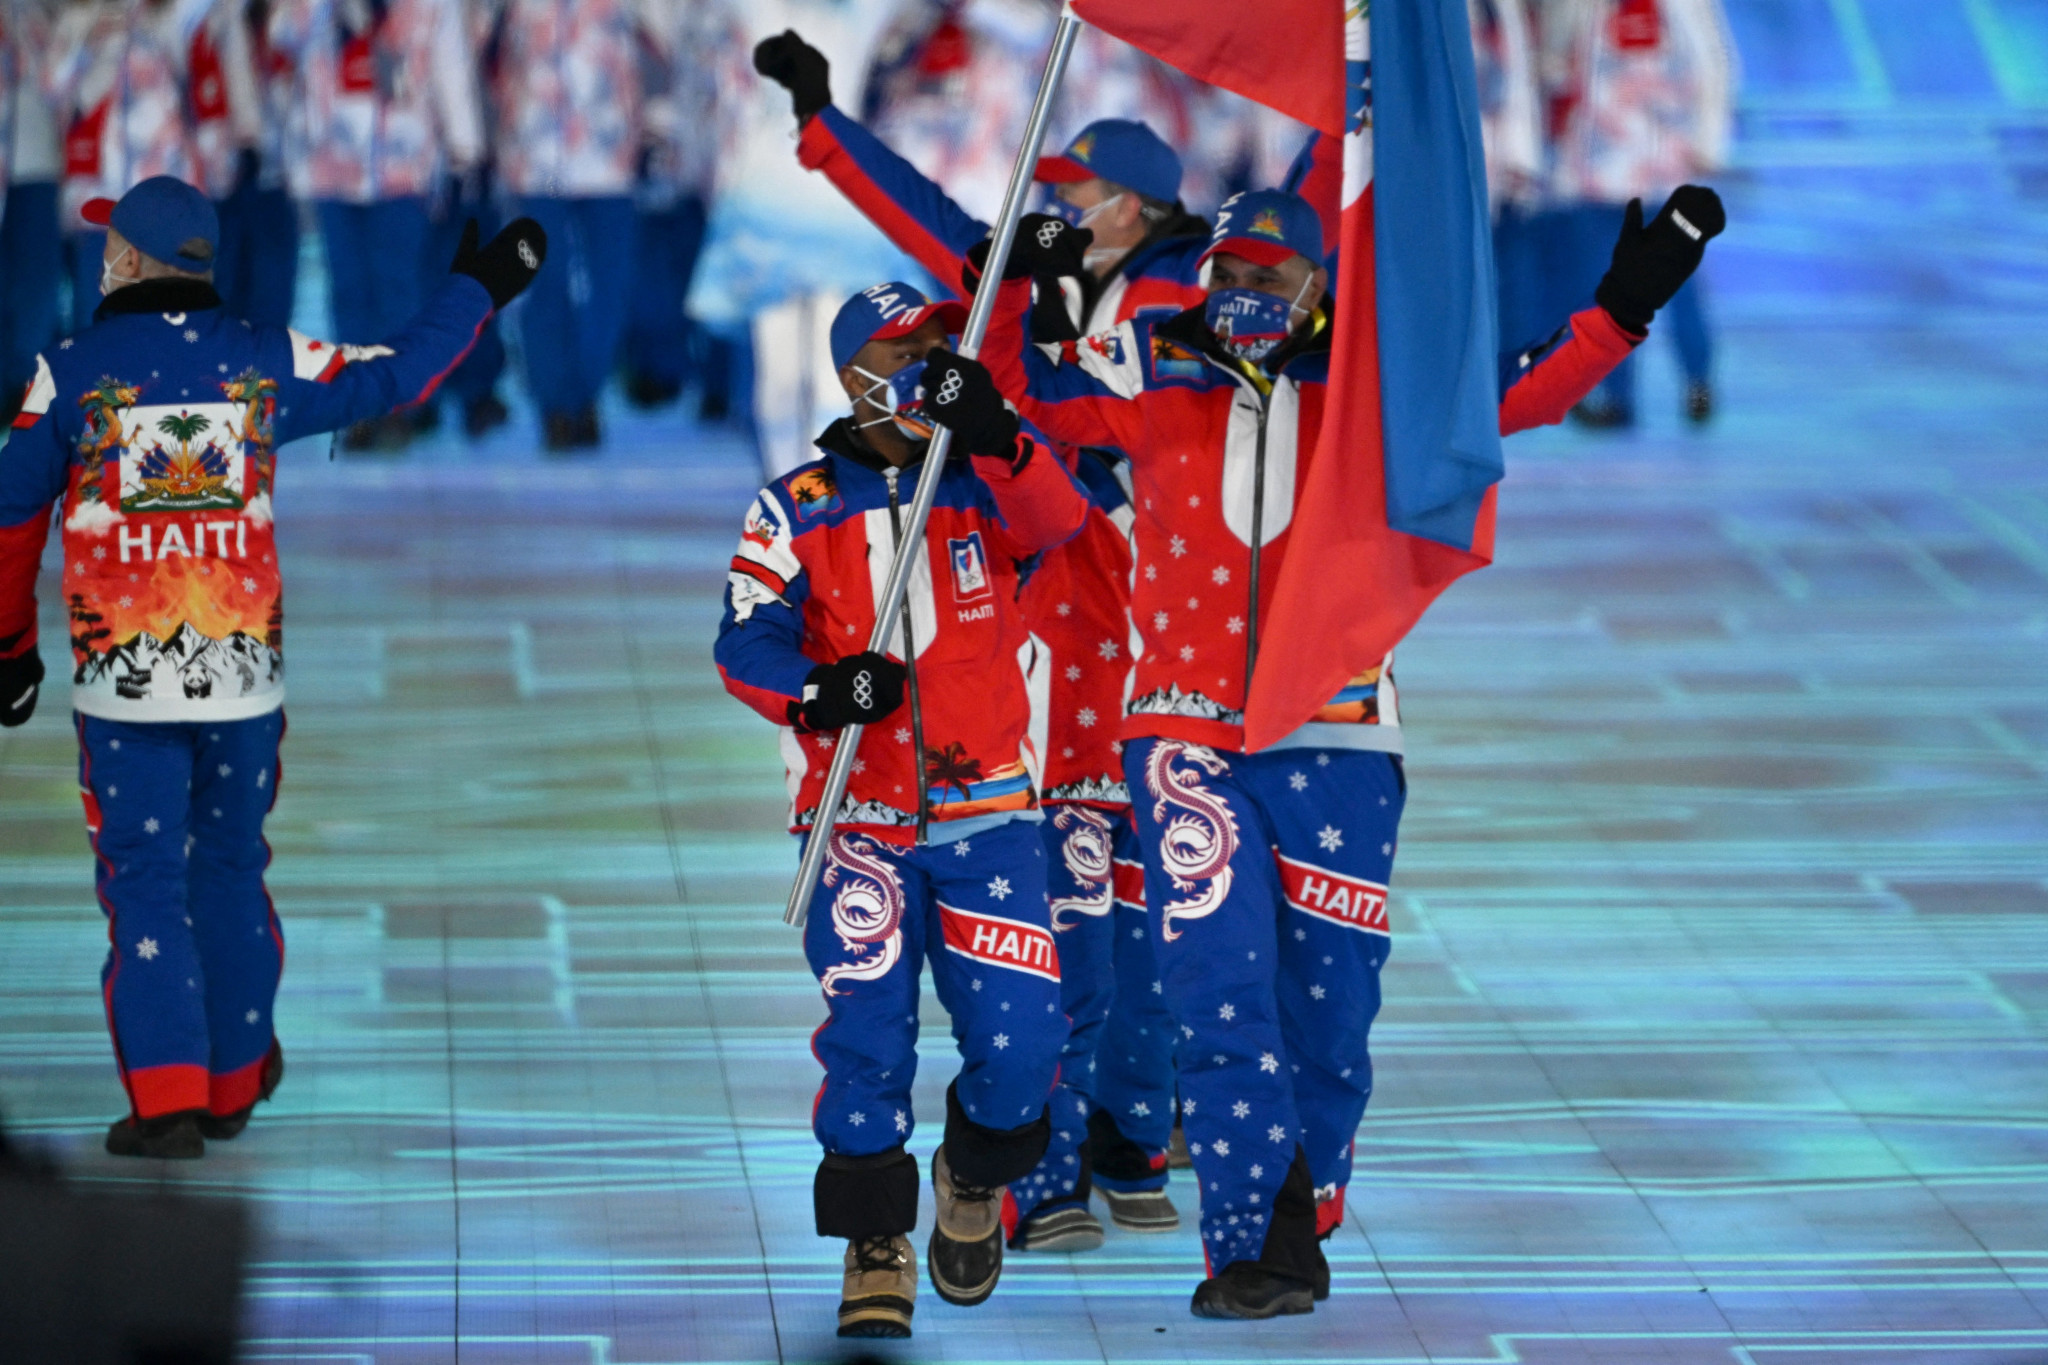 Haitian Alpine skier Richardson Viano is amongst nominees for The Visa award for the best Olympic moment ©Getty Images